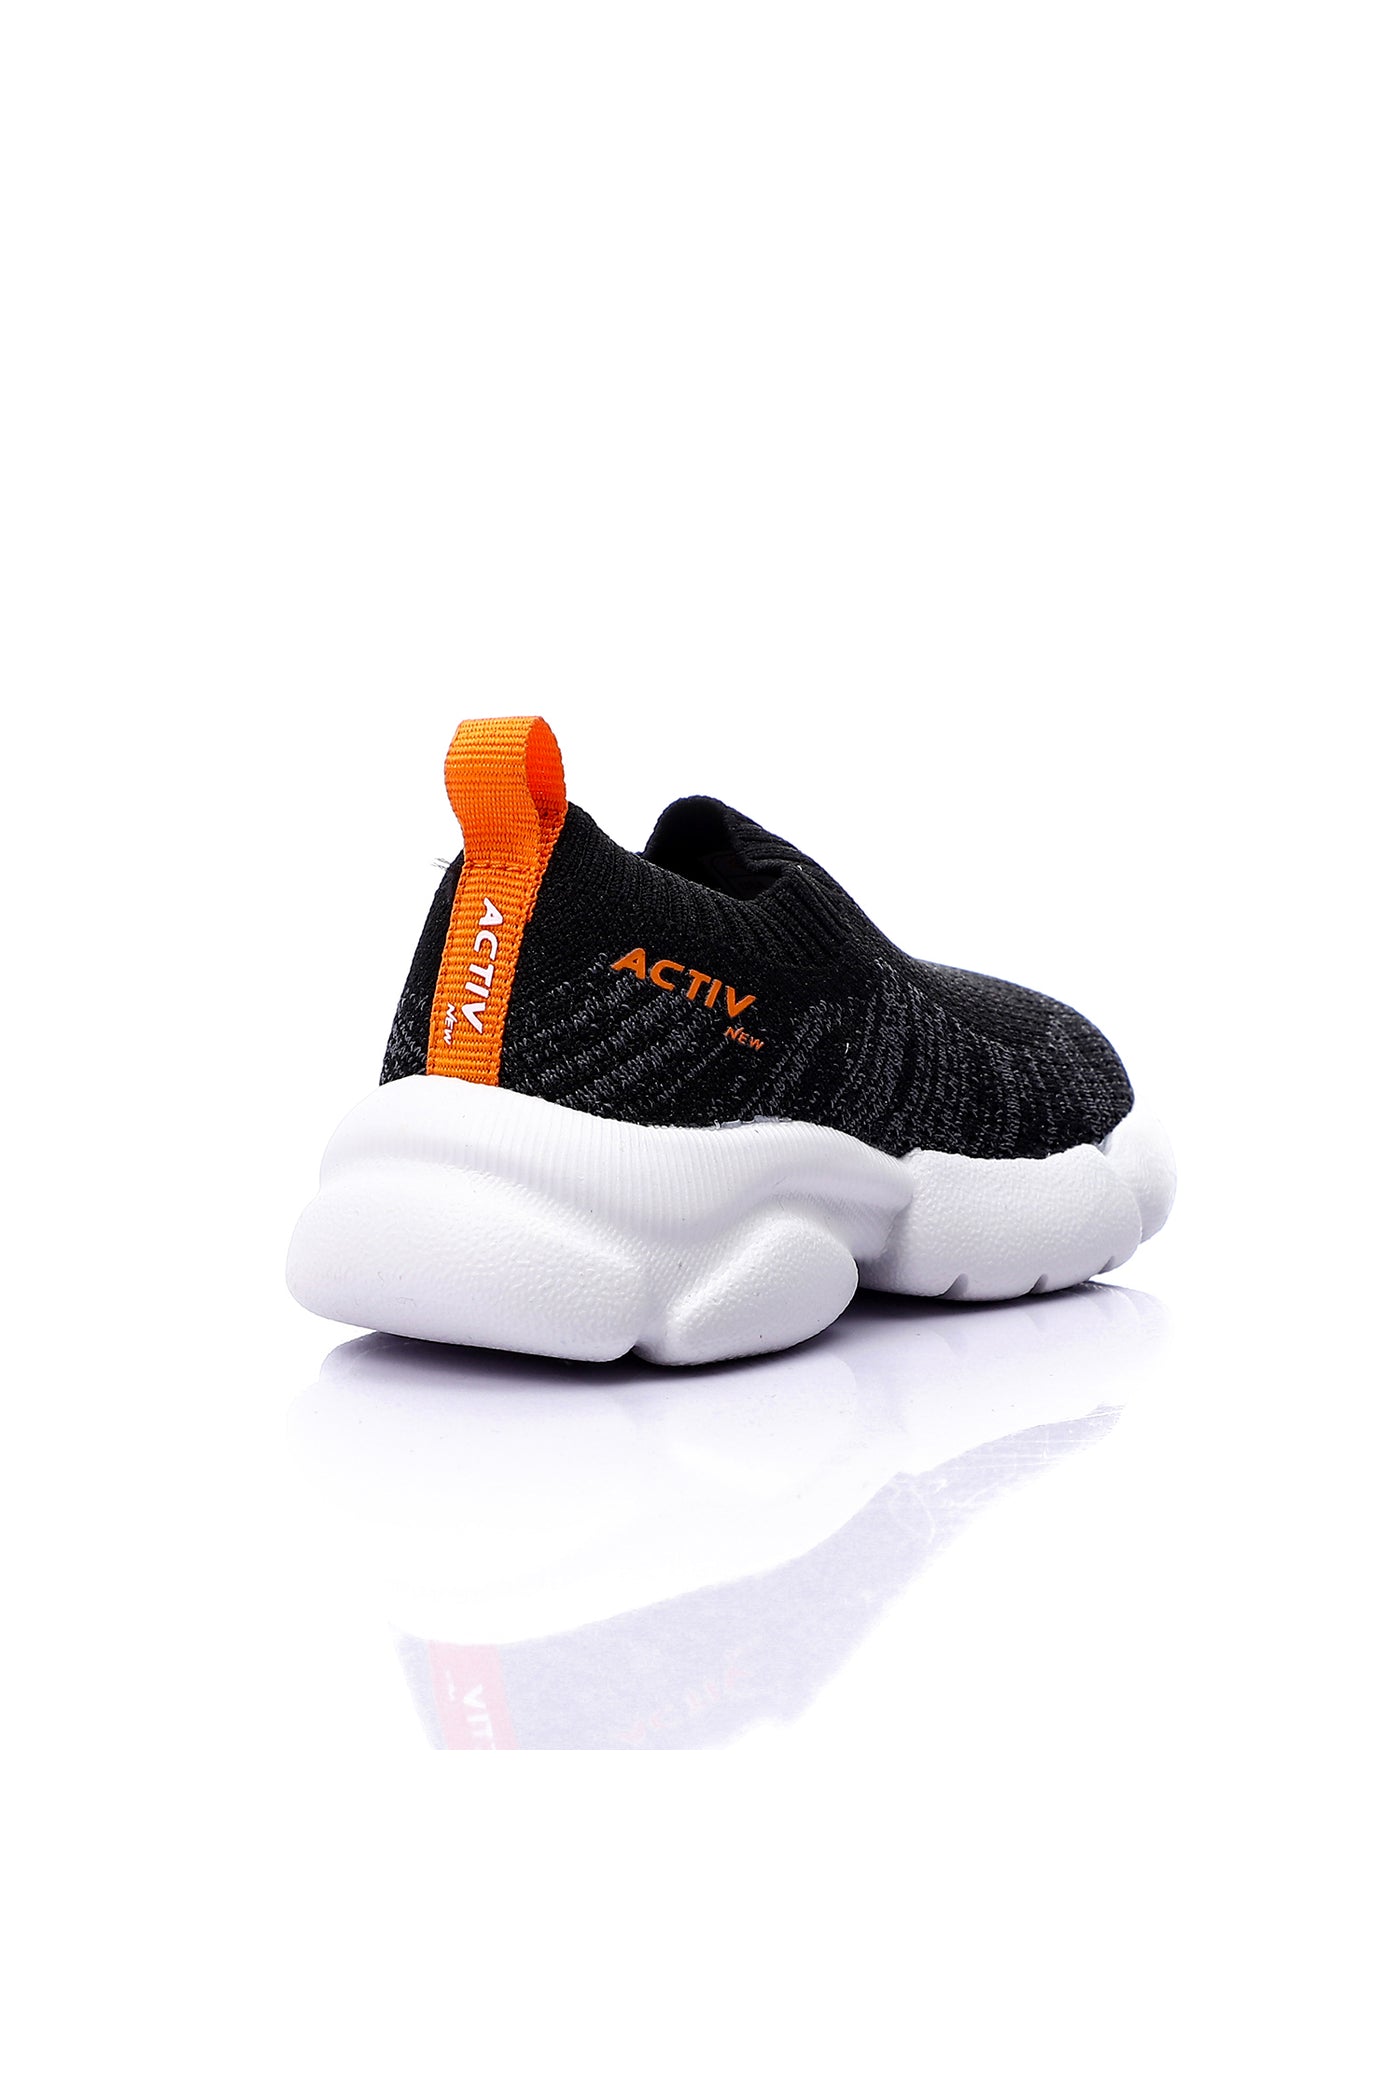 Activ Kids Unisex Slip-On Chunky Sole Sneakers